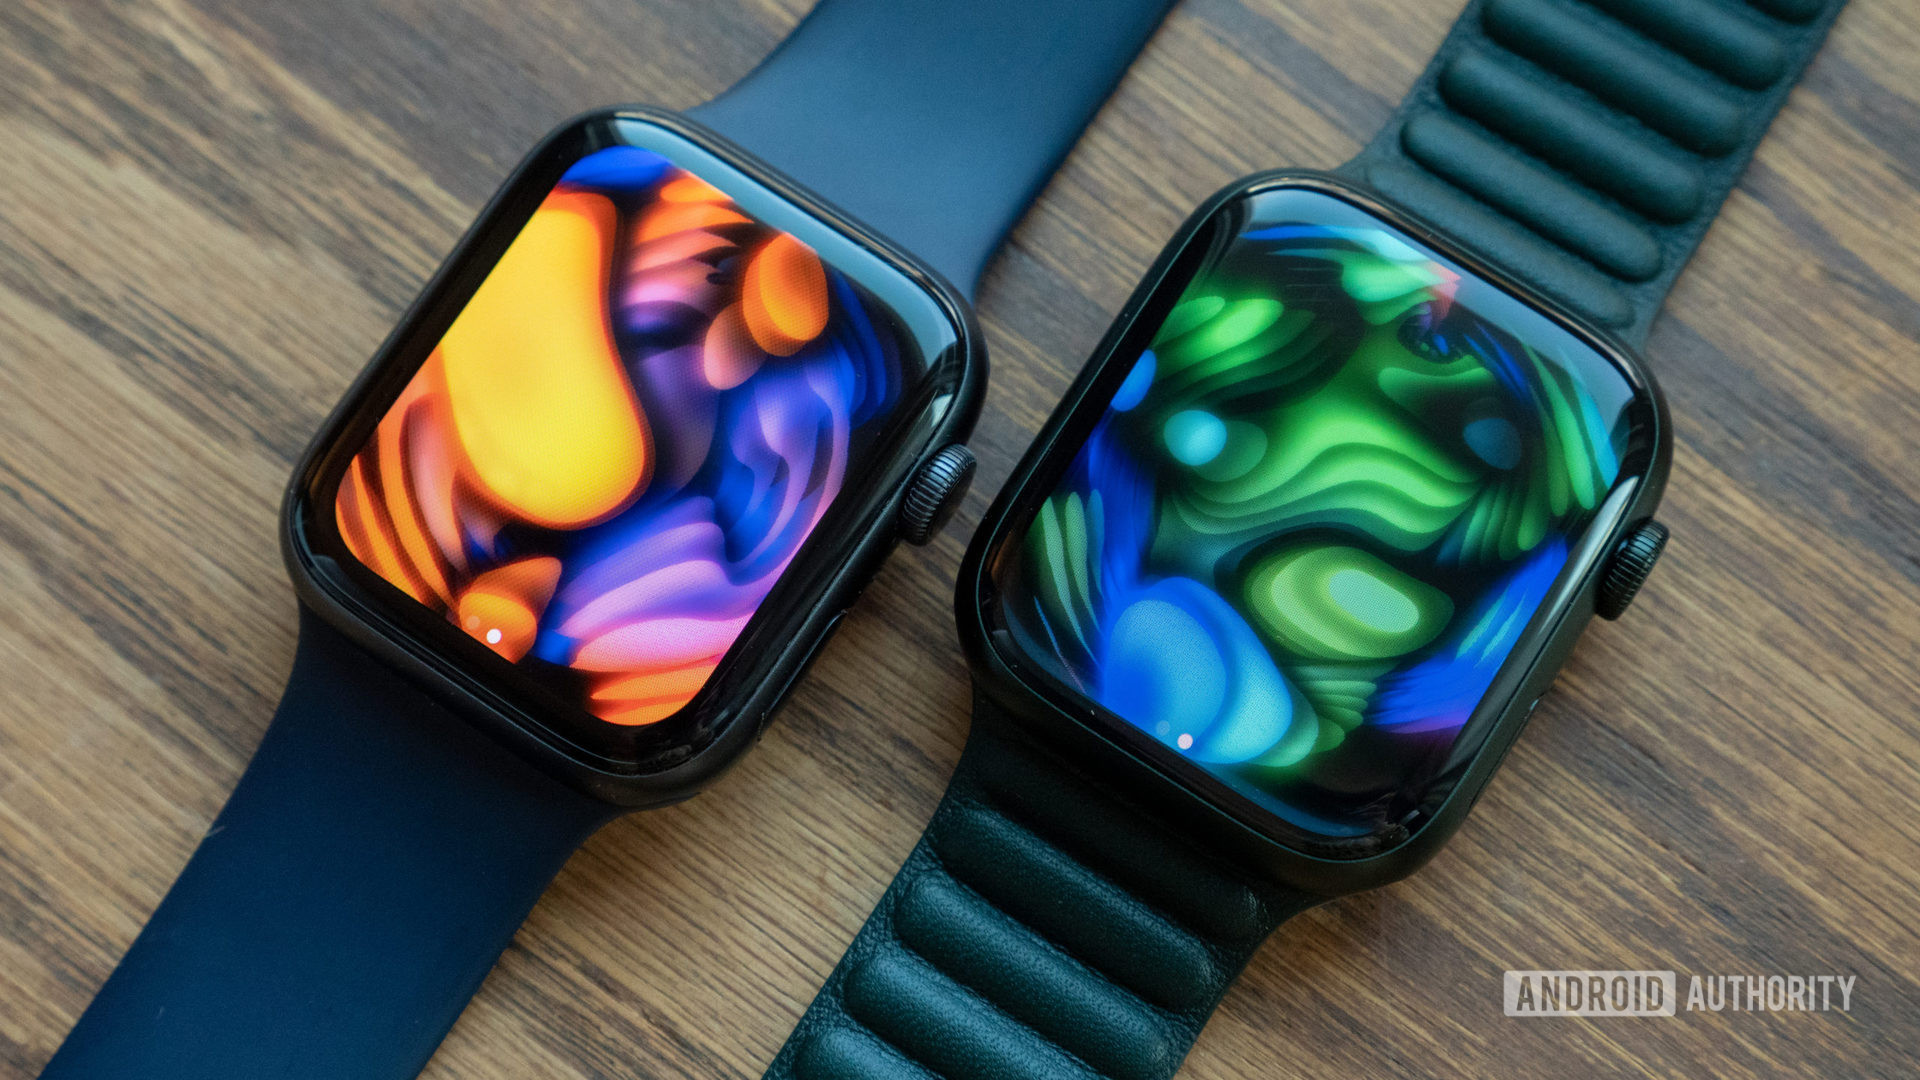 An image of the Apple Watch Series 6 and Series 7 laying on a table showing the Mindfulness app